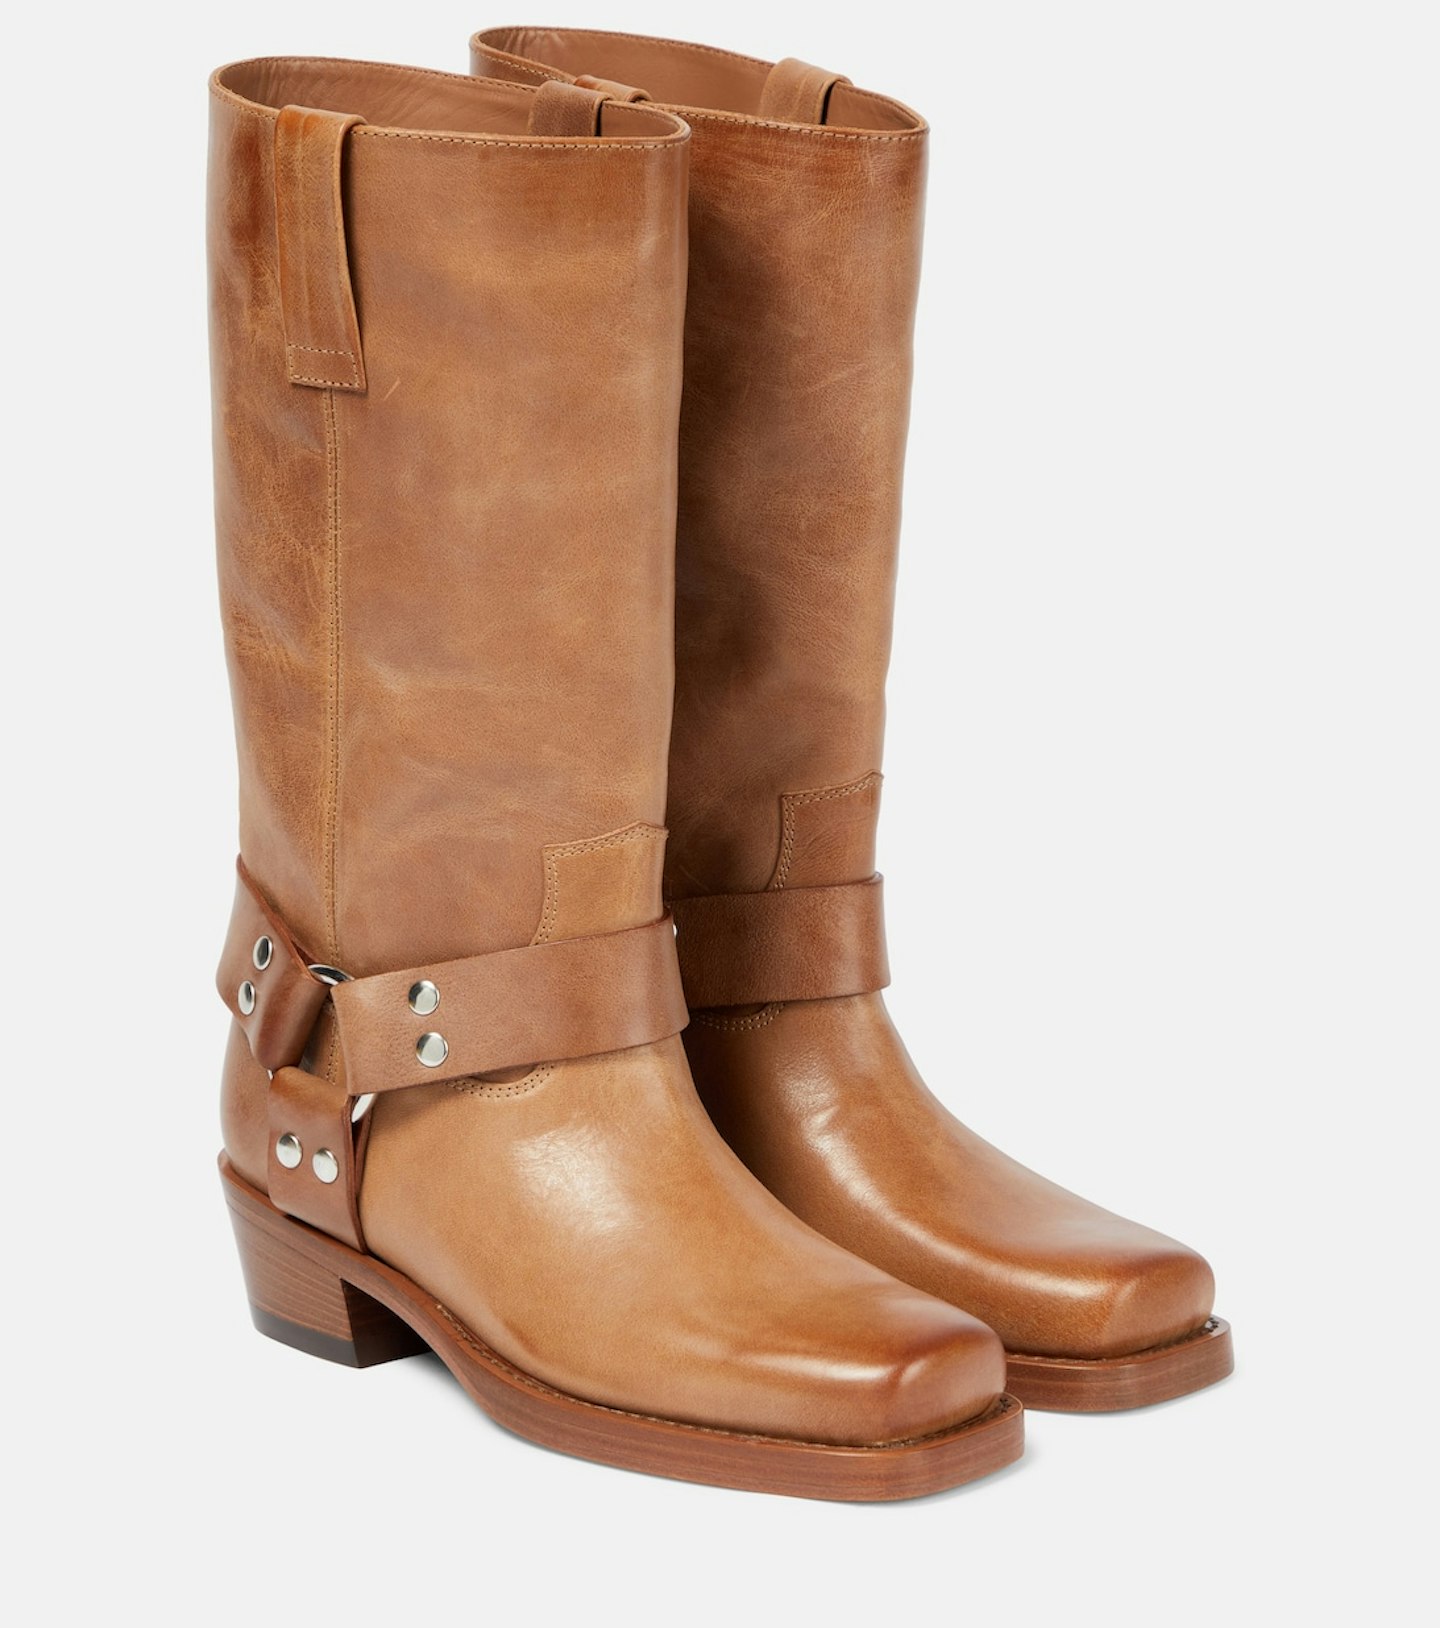 Paris Texas, Roxy Leather Knee-High Boots